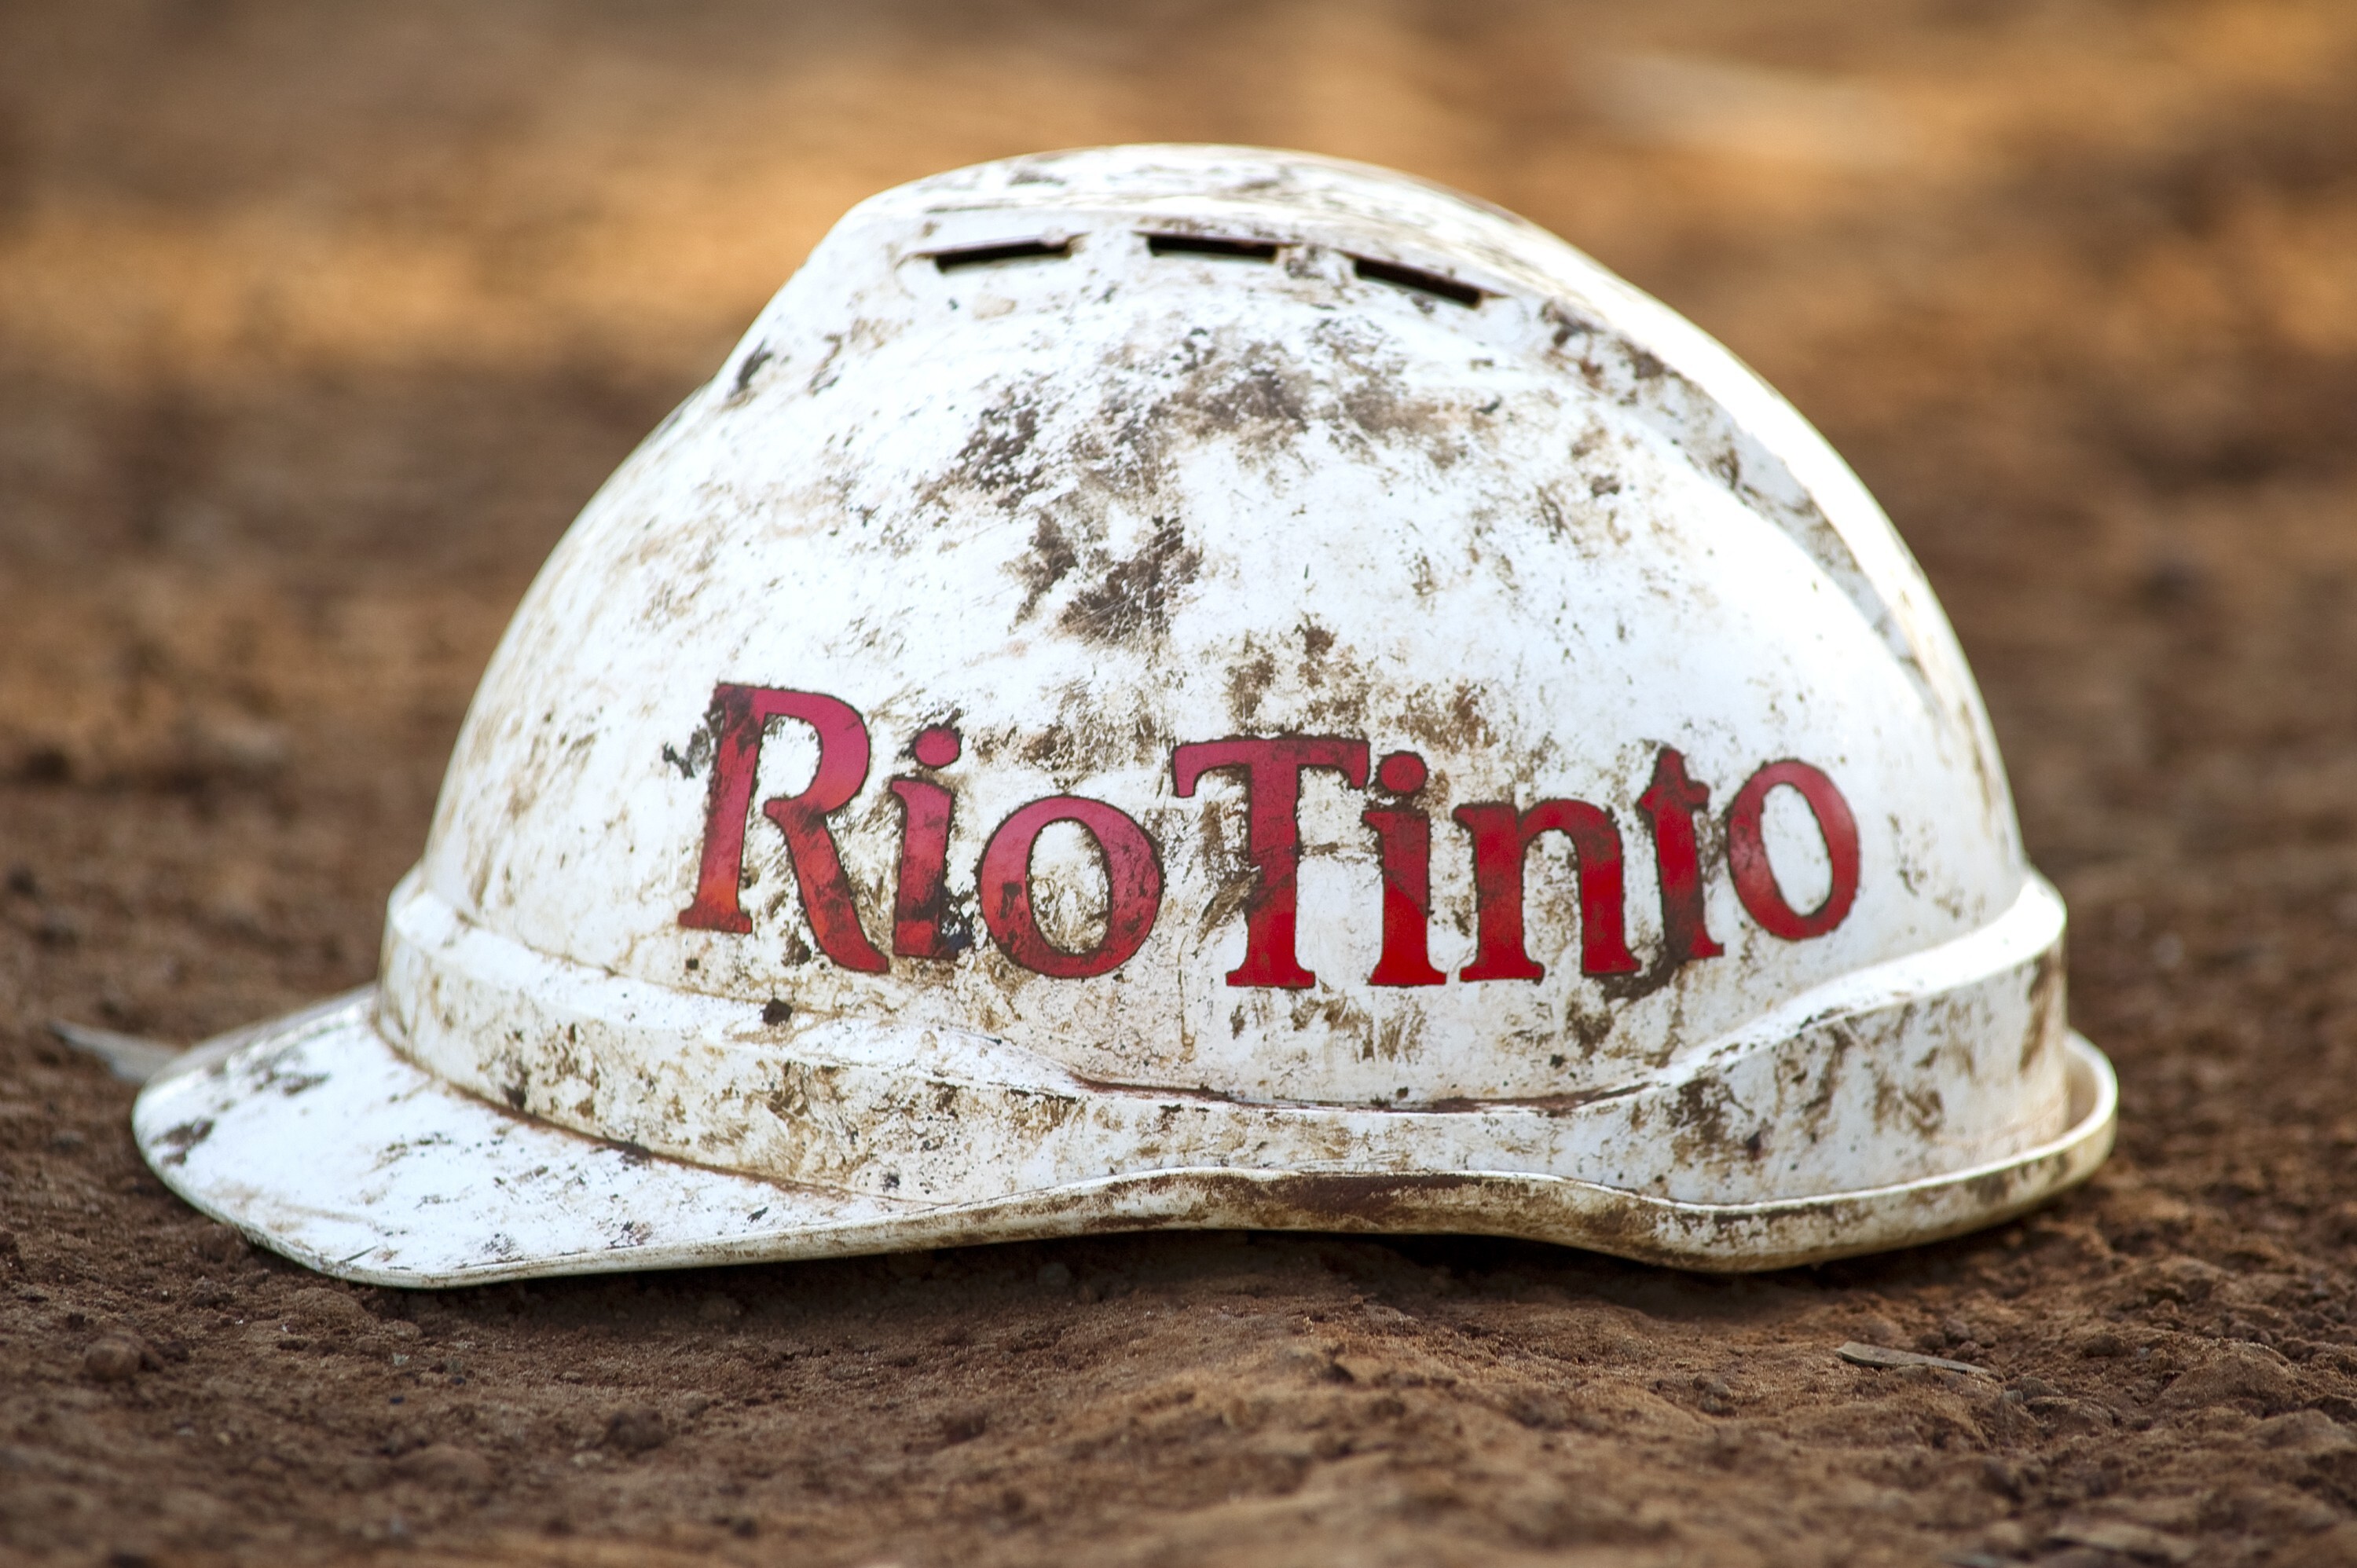 Anglo-Australian iron ore miner Rio Tinto says it expanded iron ore shipments and on-demand sales to meet increased demand in China this year. Photo: Getty Images